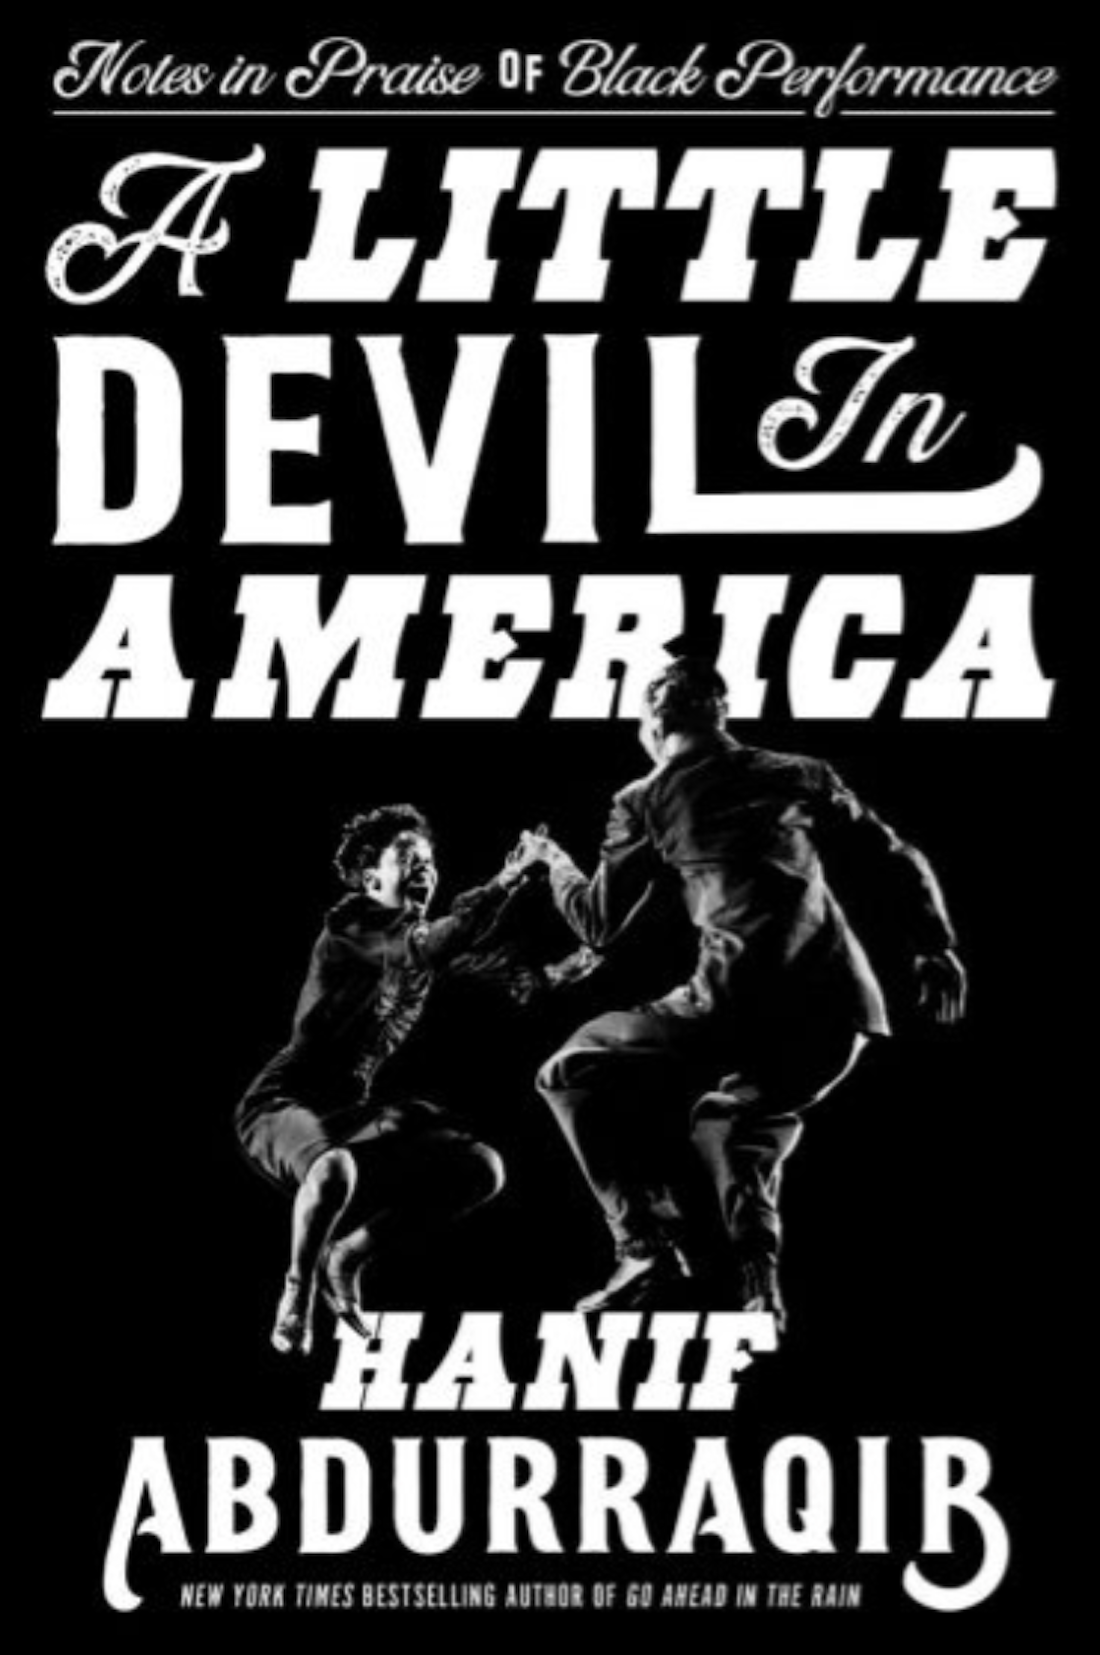 Cover art for Hanif Abdurraqib's A Little Devil in America: Notes in Praise of Black Performance